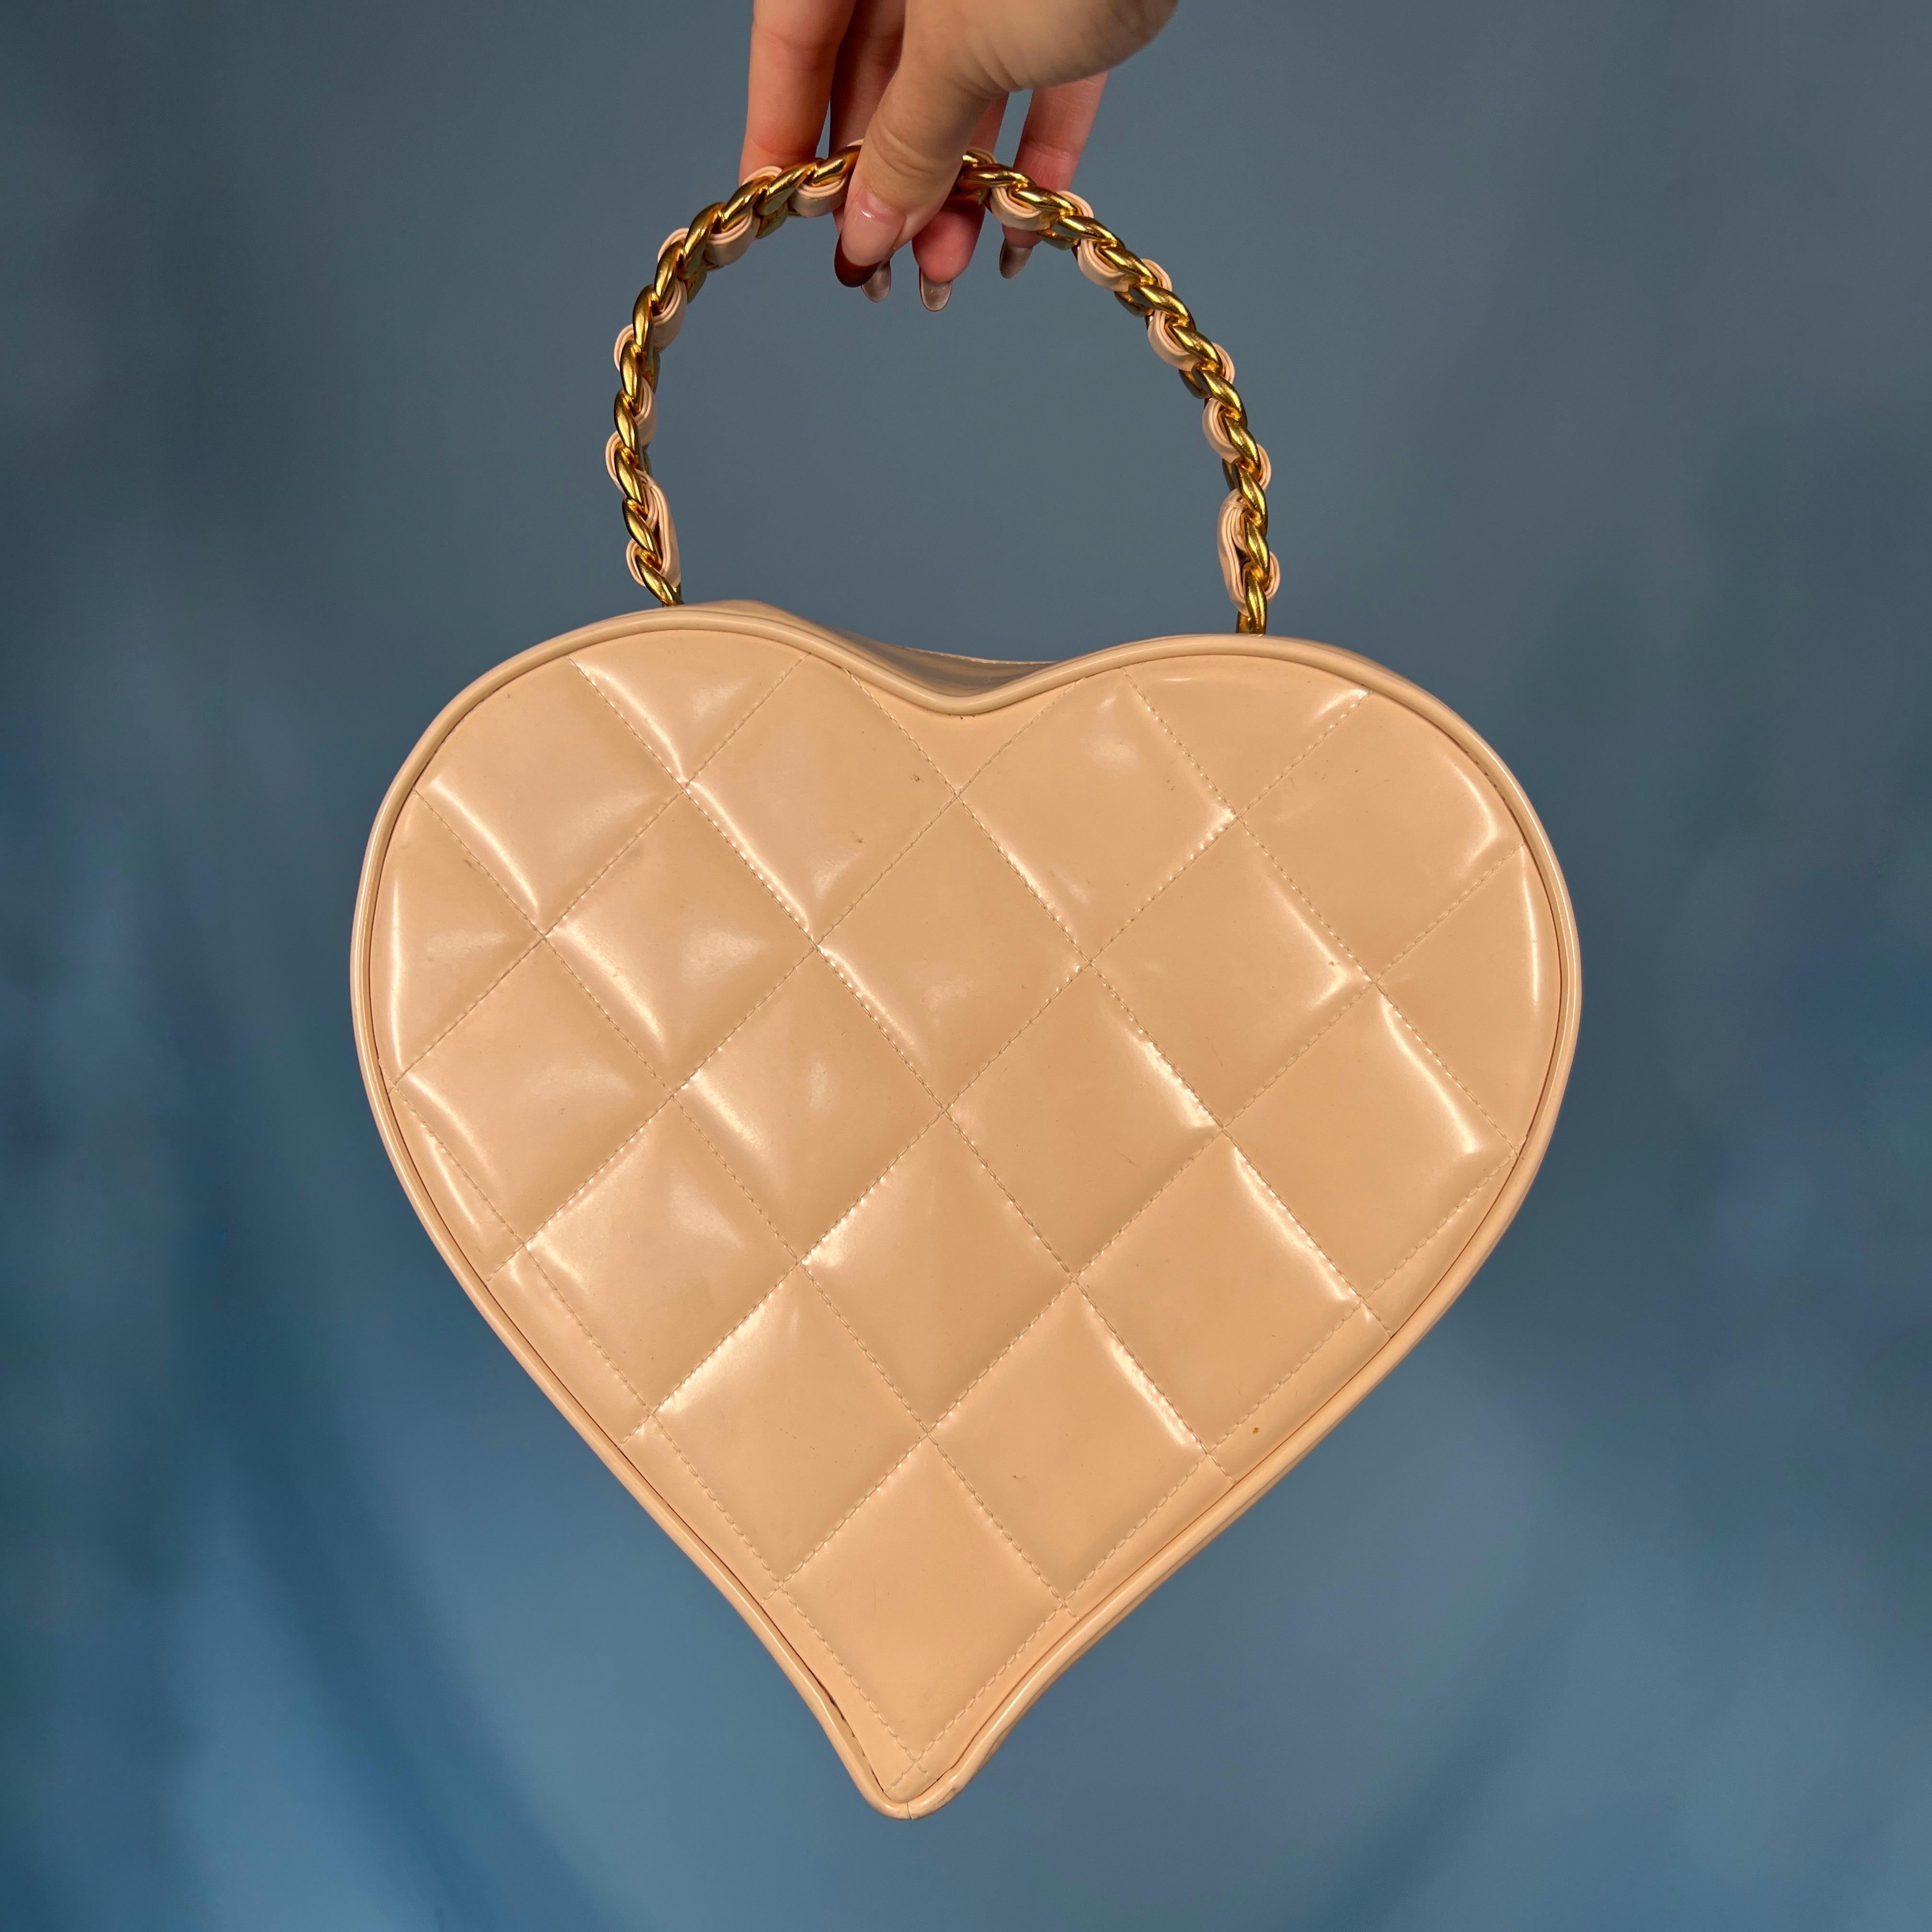 Chanel Spring 1995 Heart CC Patent Quilted Leather Bag 8